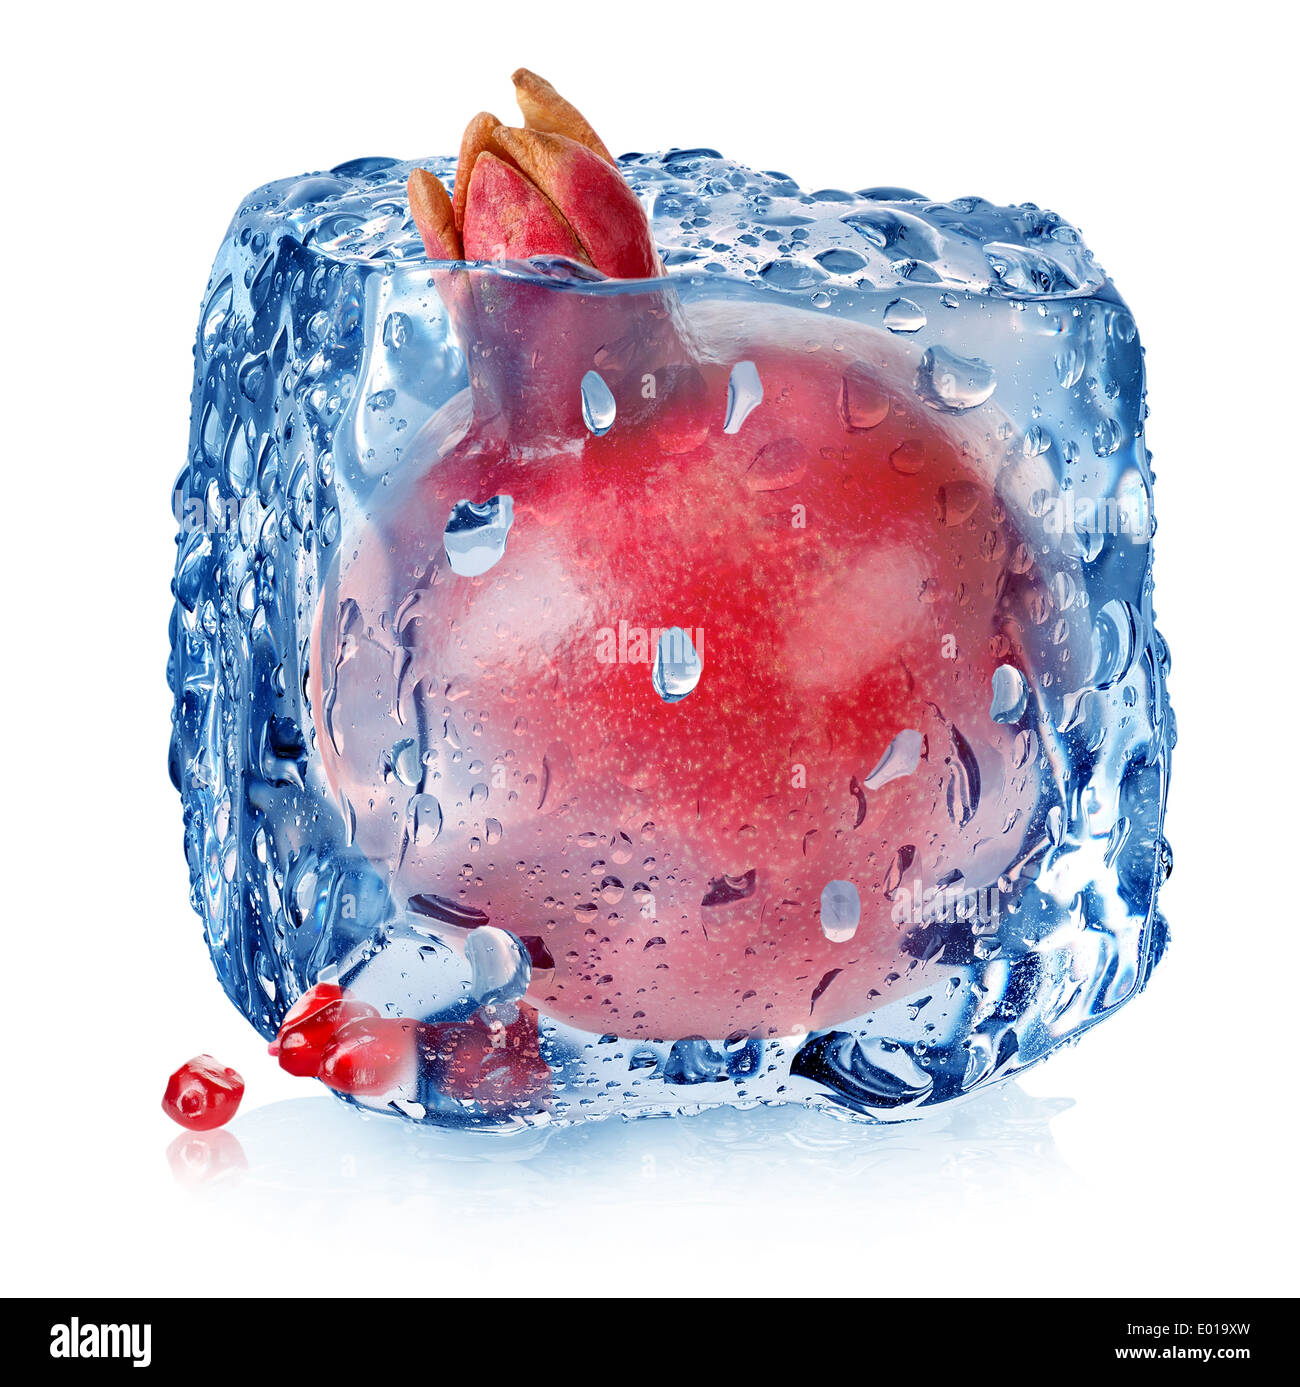 Pomegranate in ice cube isolated on white Stock Photo